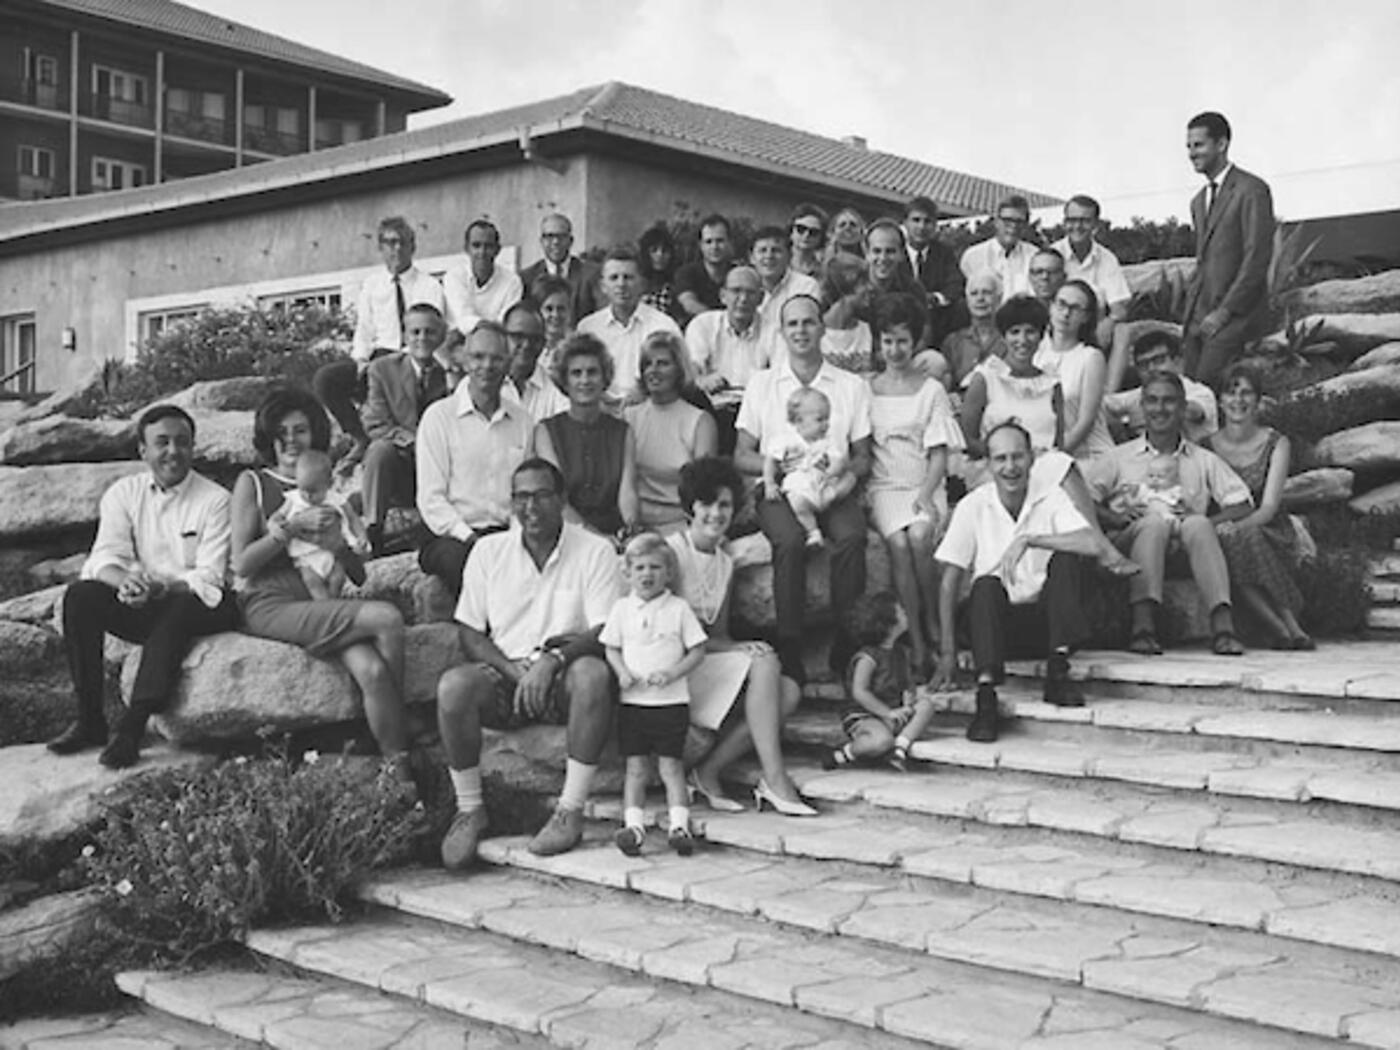 MIT Sloan Fellows and families in Africa, July 1966 (Photo Credit: MIT Museum)